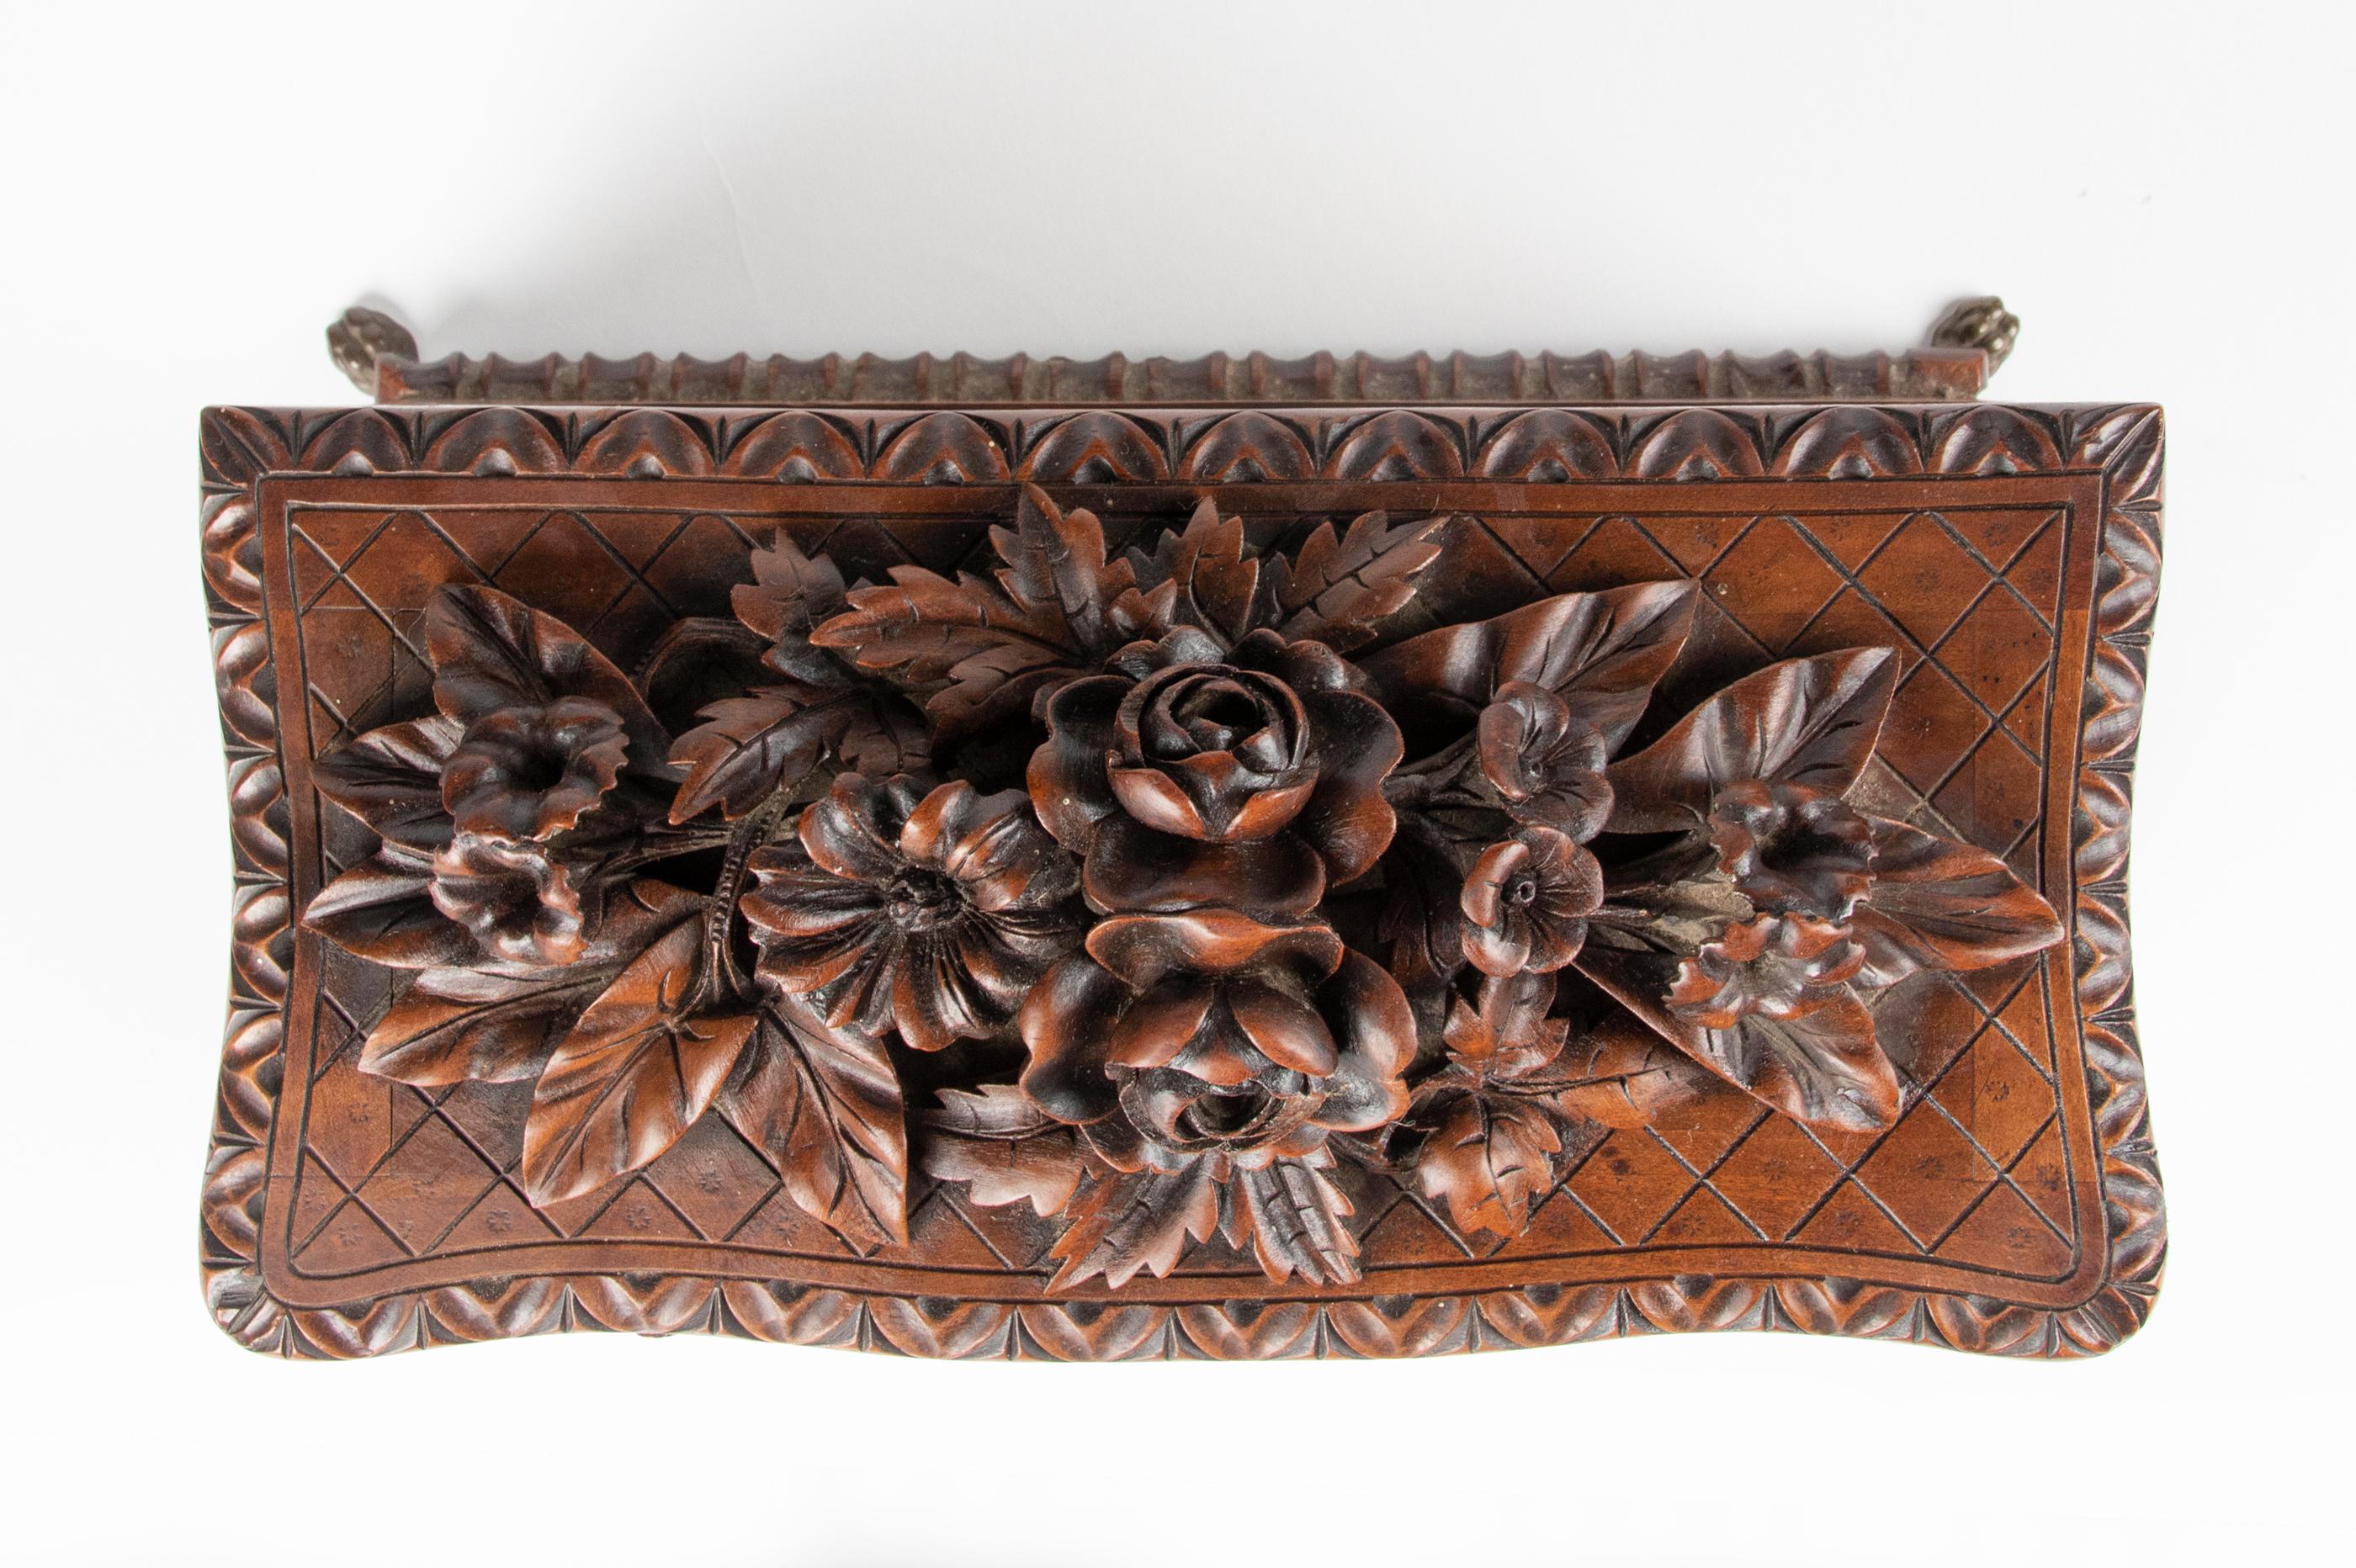 Late 19th Century 19th Century Black Forest Walnut Jewelry Chest